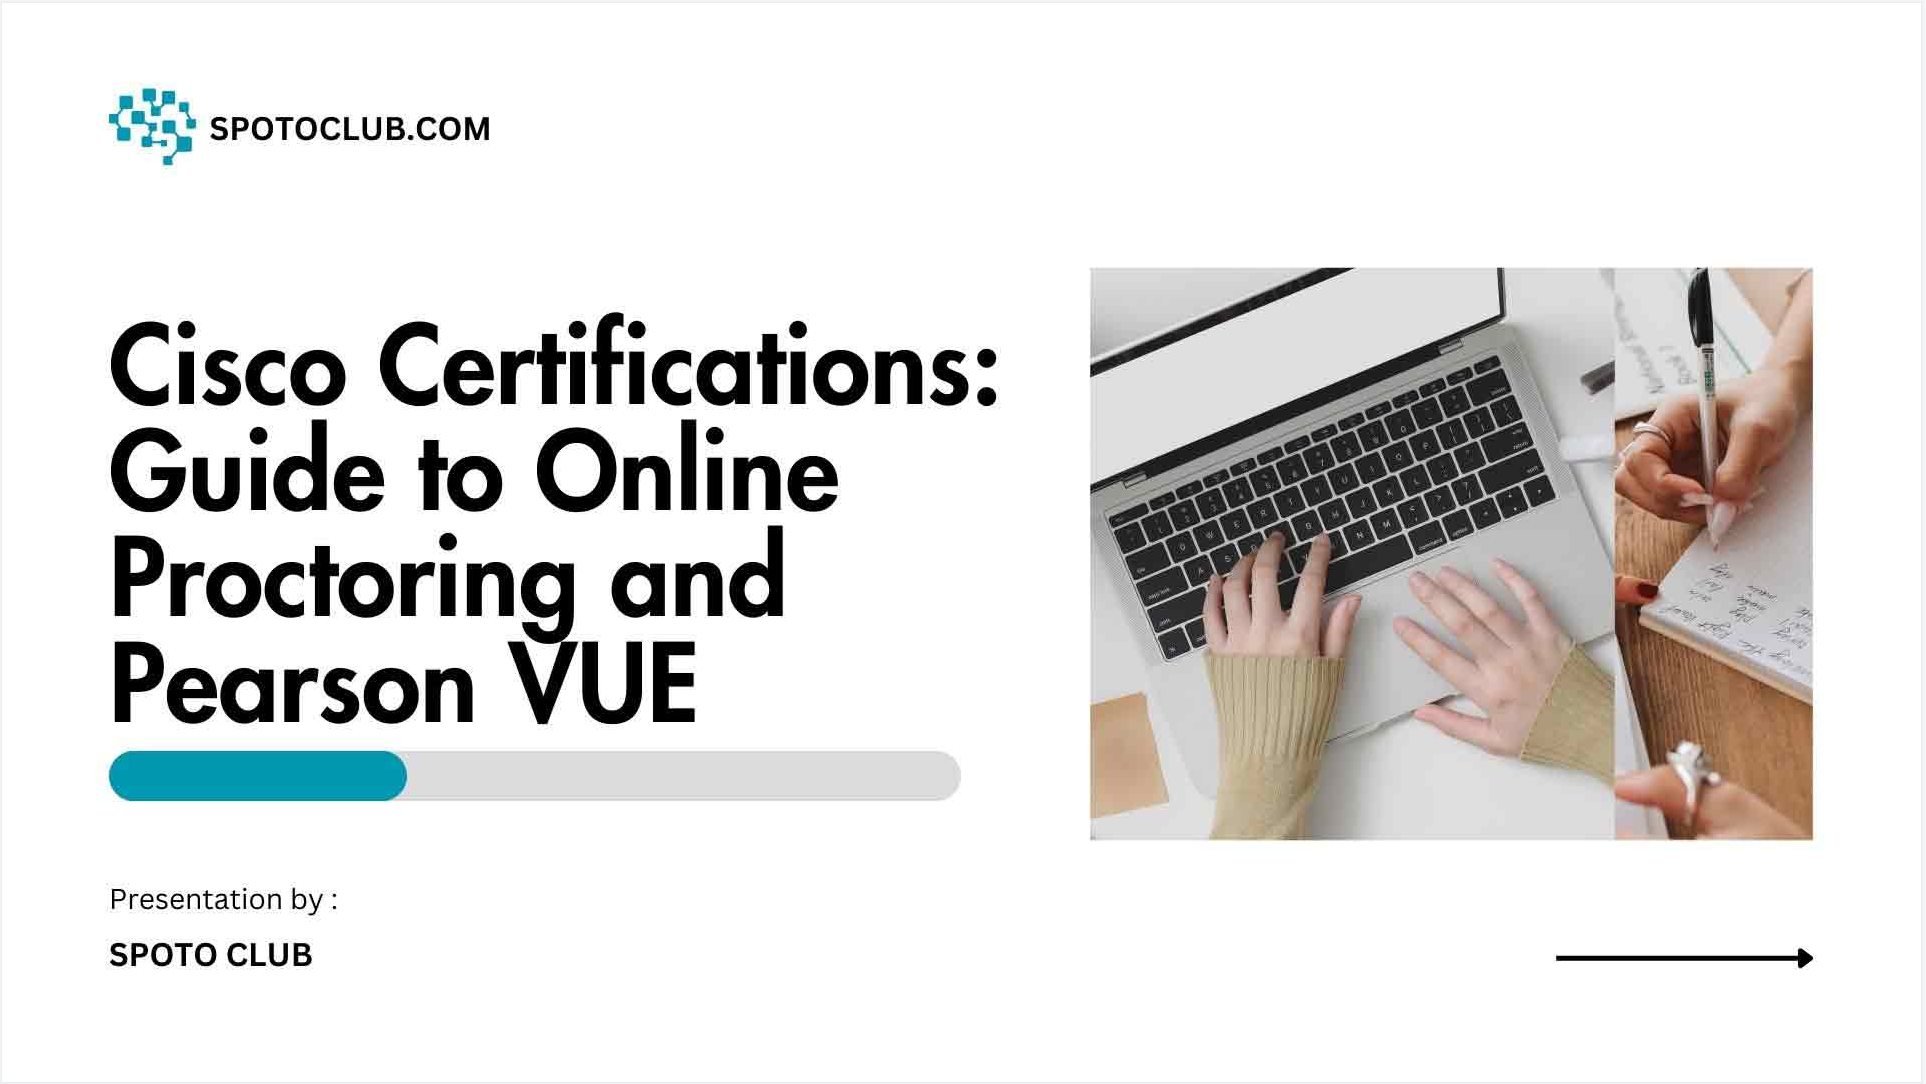 Cisco Certifications: Guide to Online Proctoring and Pearson VUE